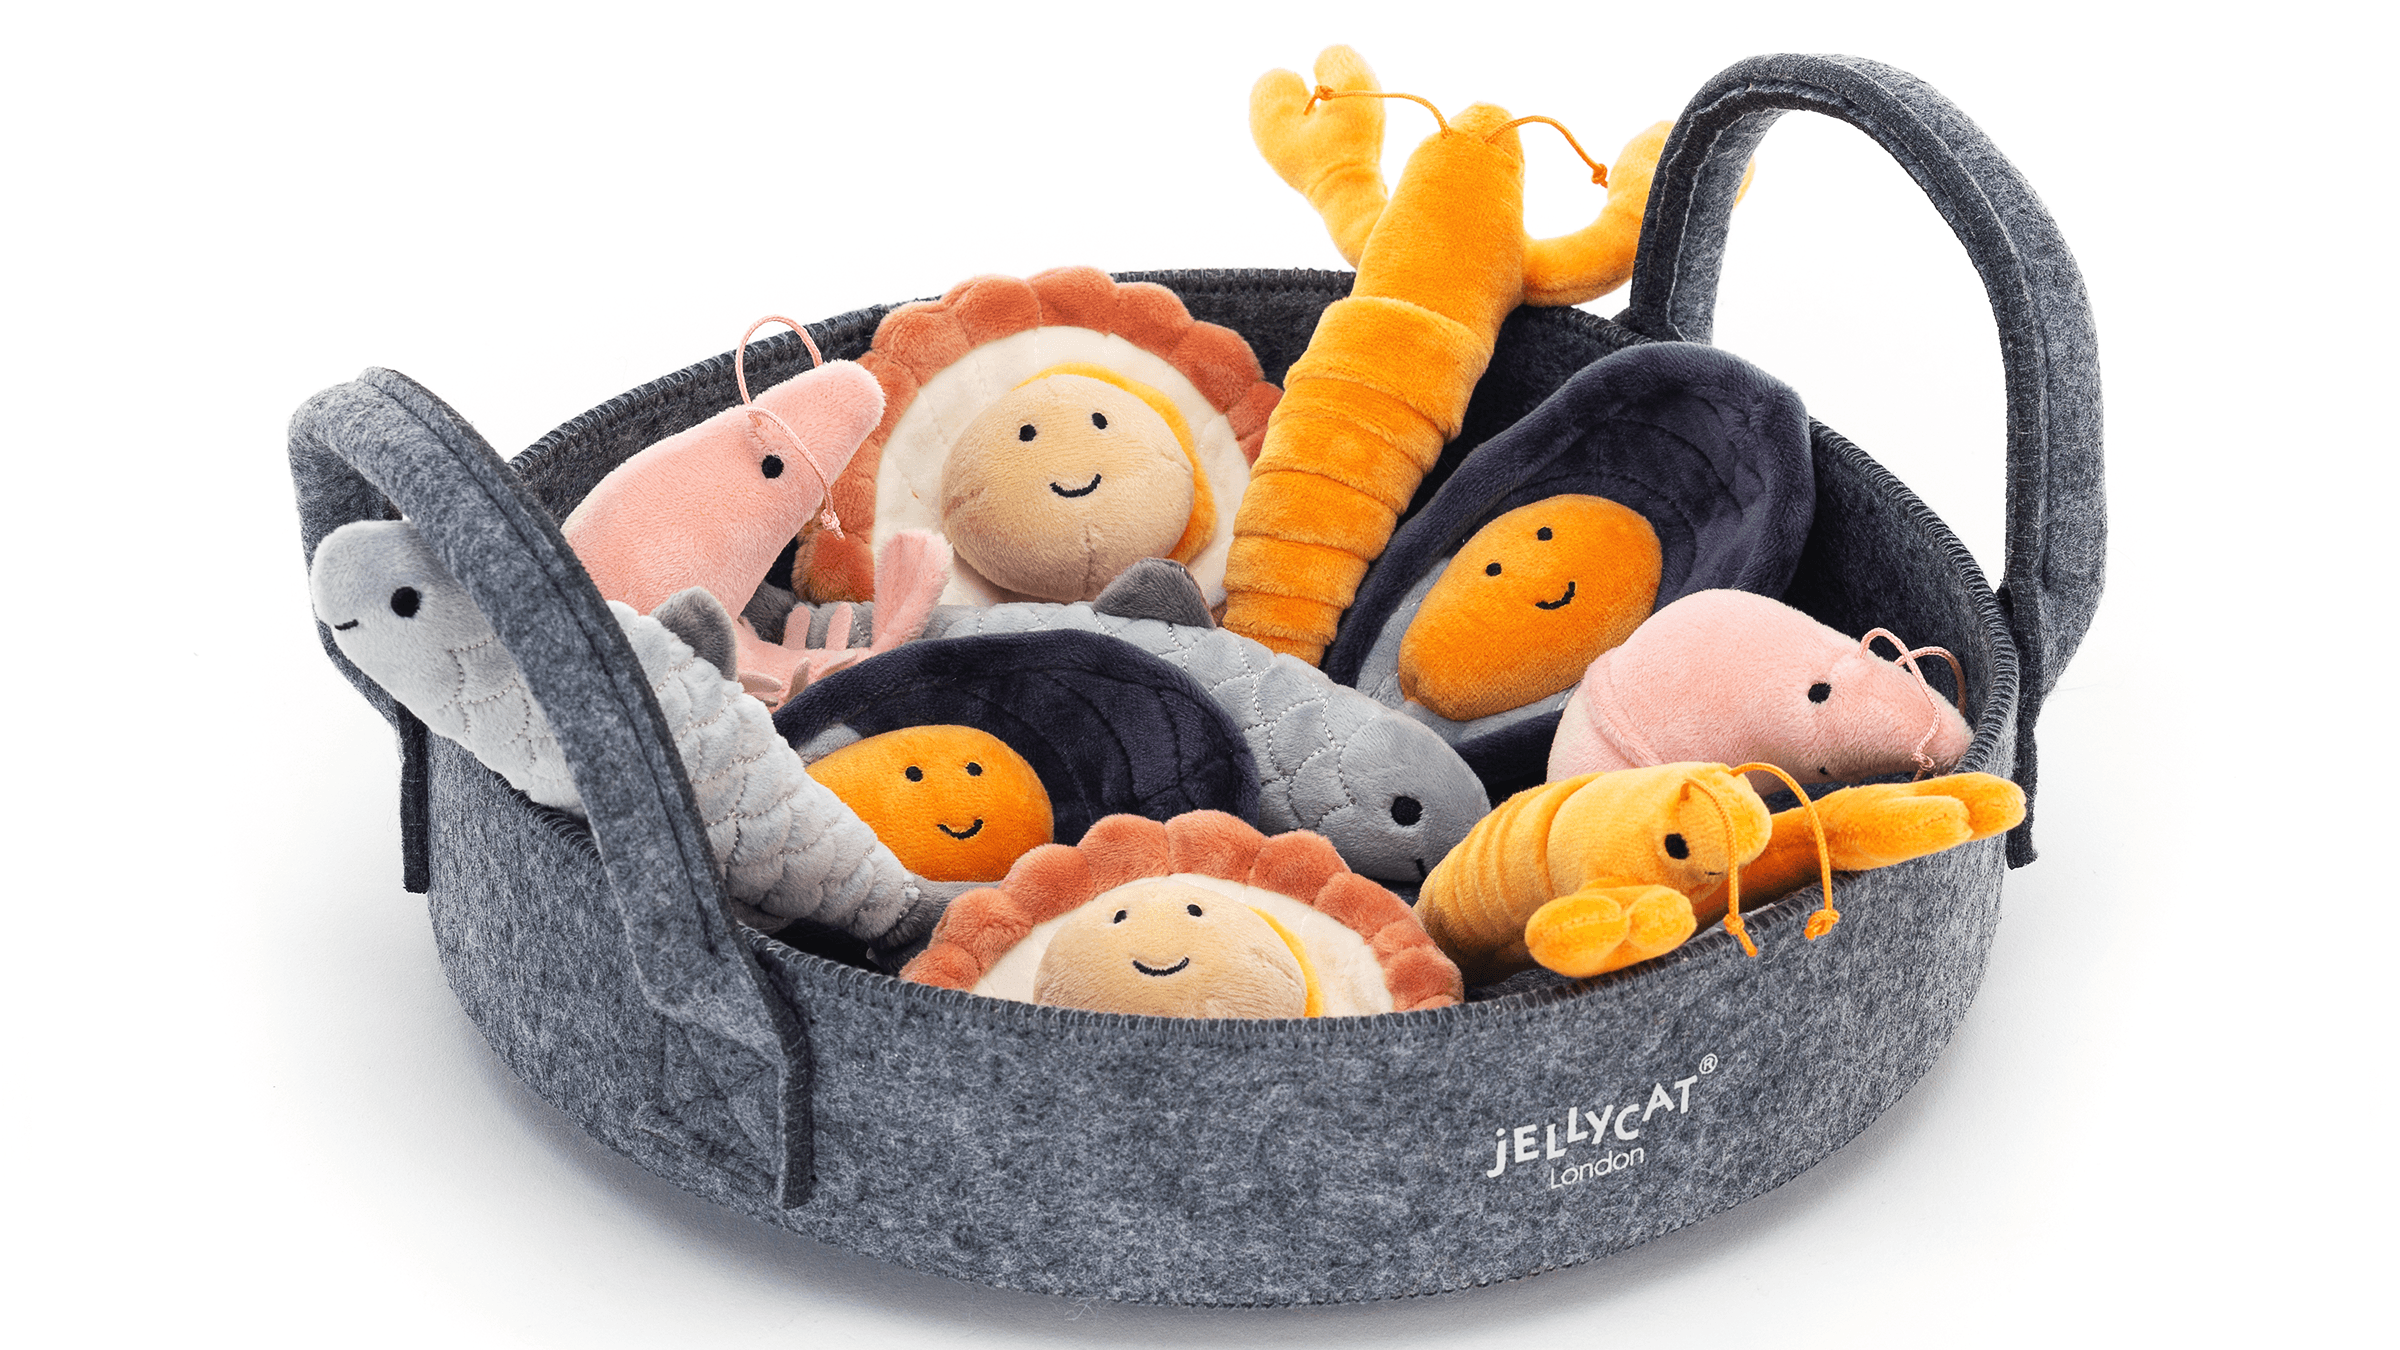 Jellycat's seafood collection